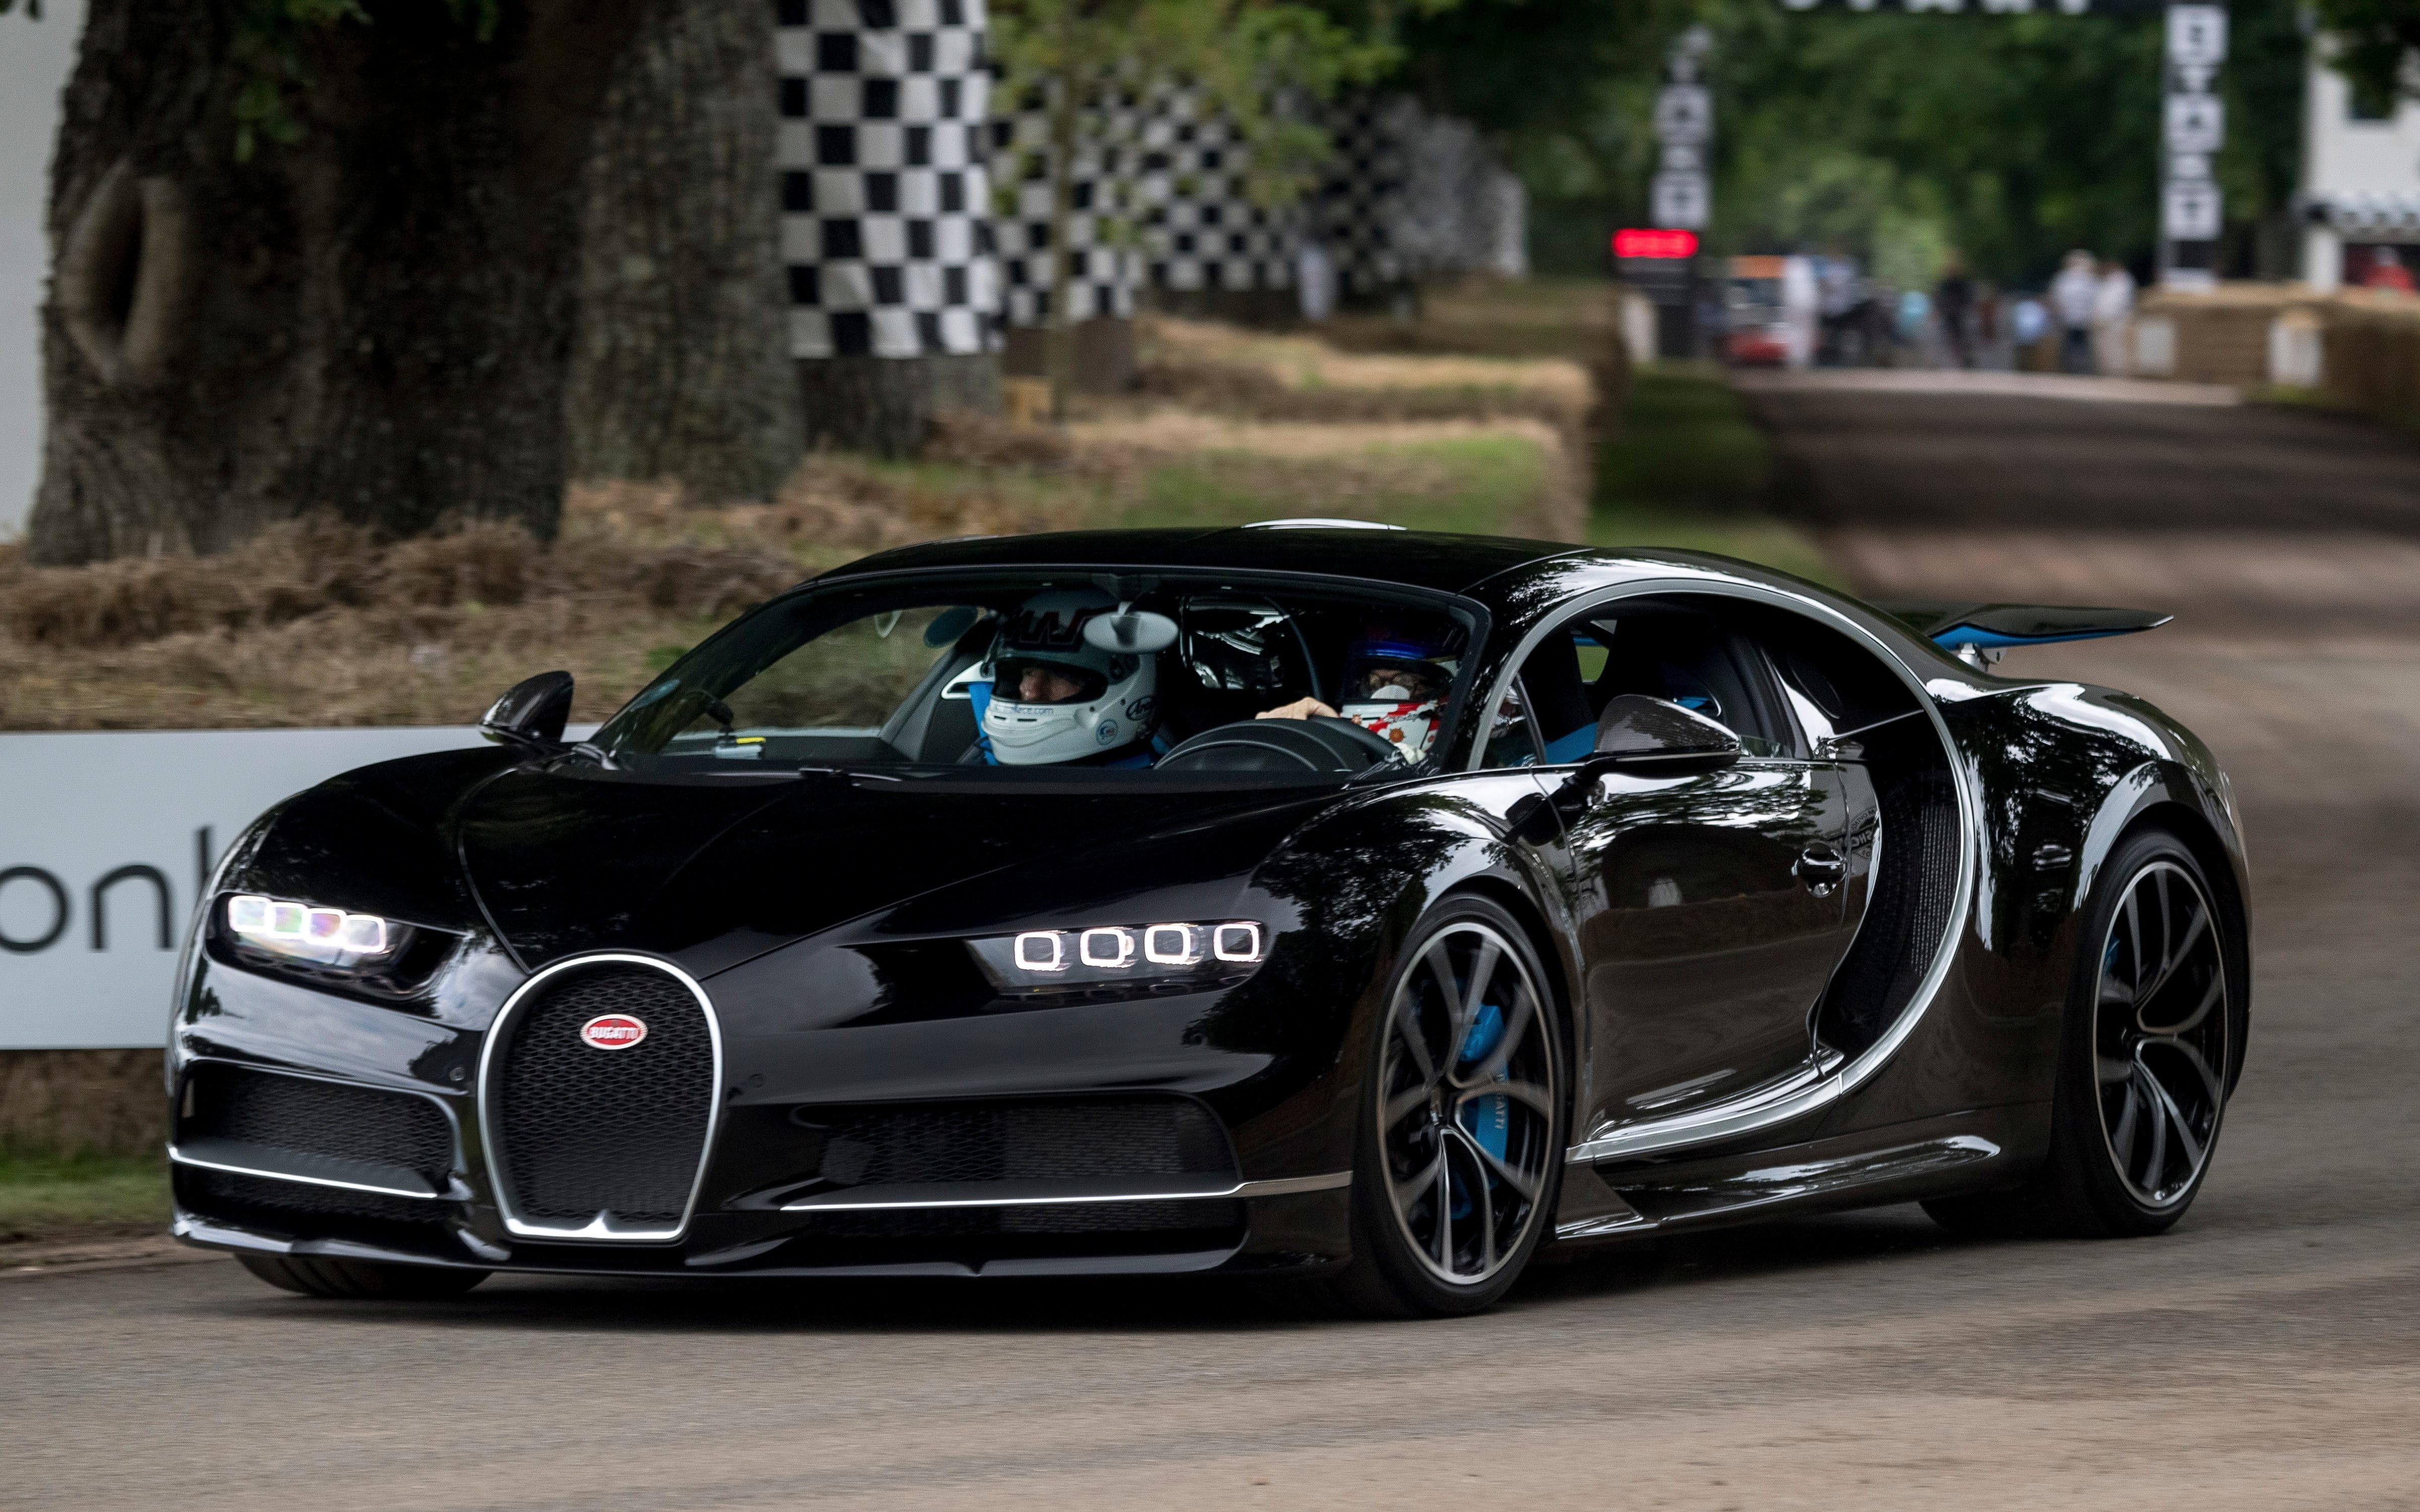 Introducing The New Bugatti Chiron Divo Which Is Having Over 1500